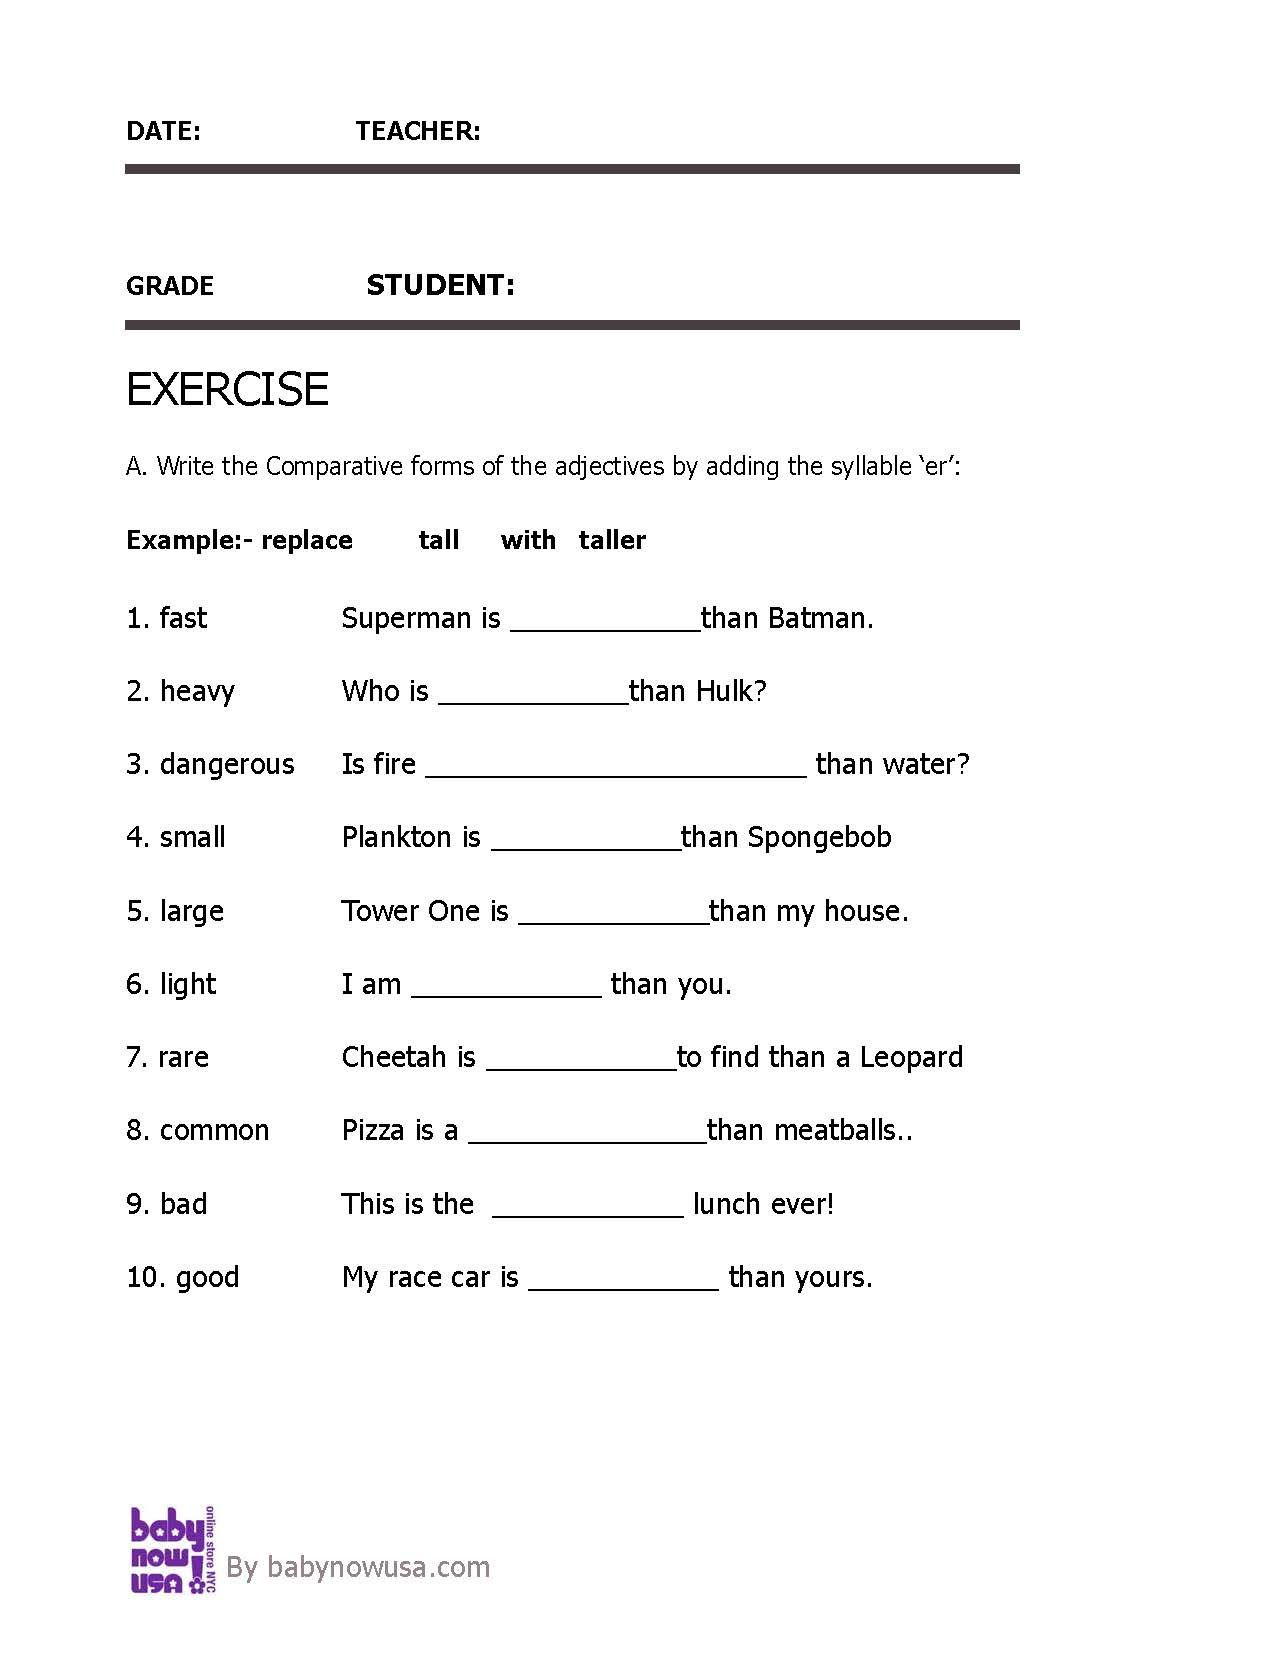 adjectives-worksheet-for-grade-3-with-answers-adjectiveworksheets